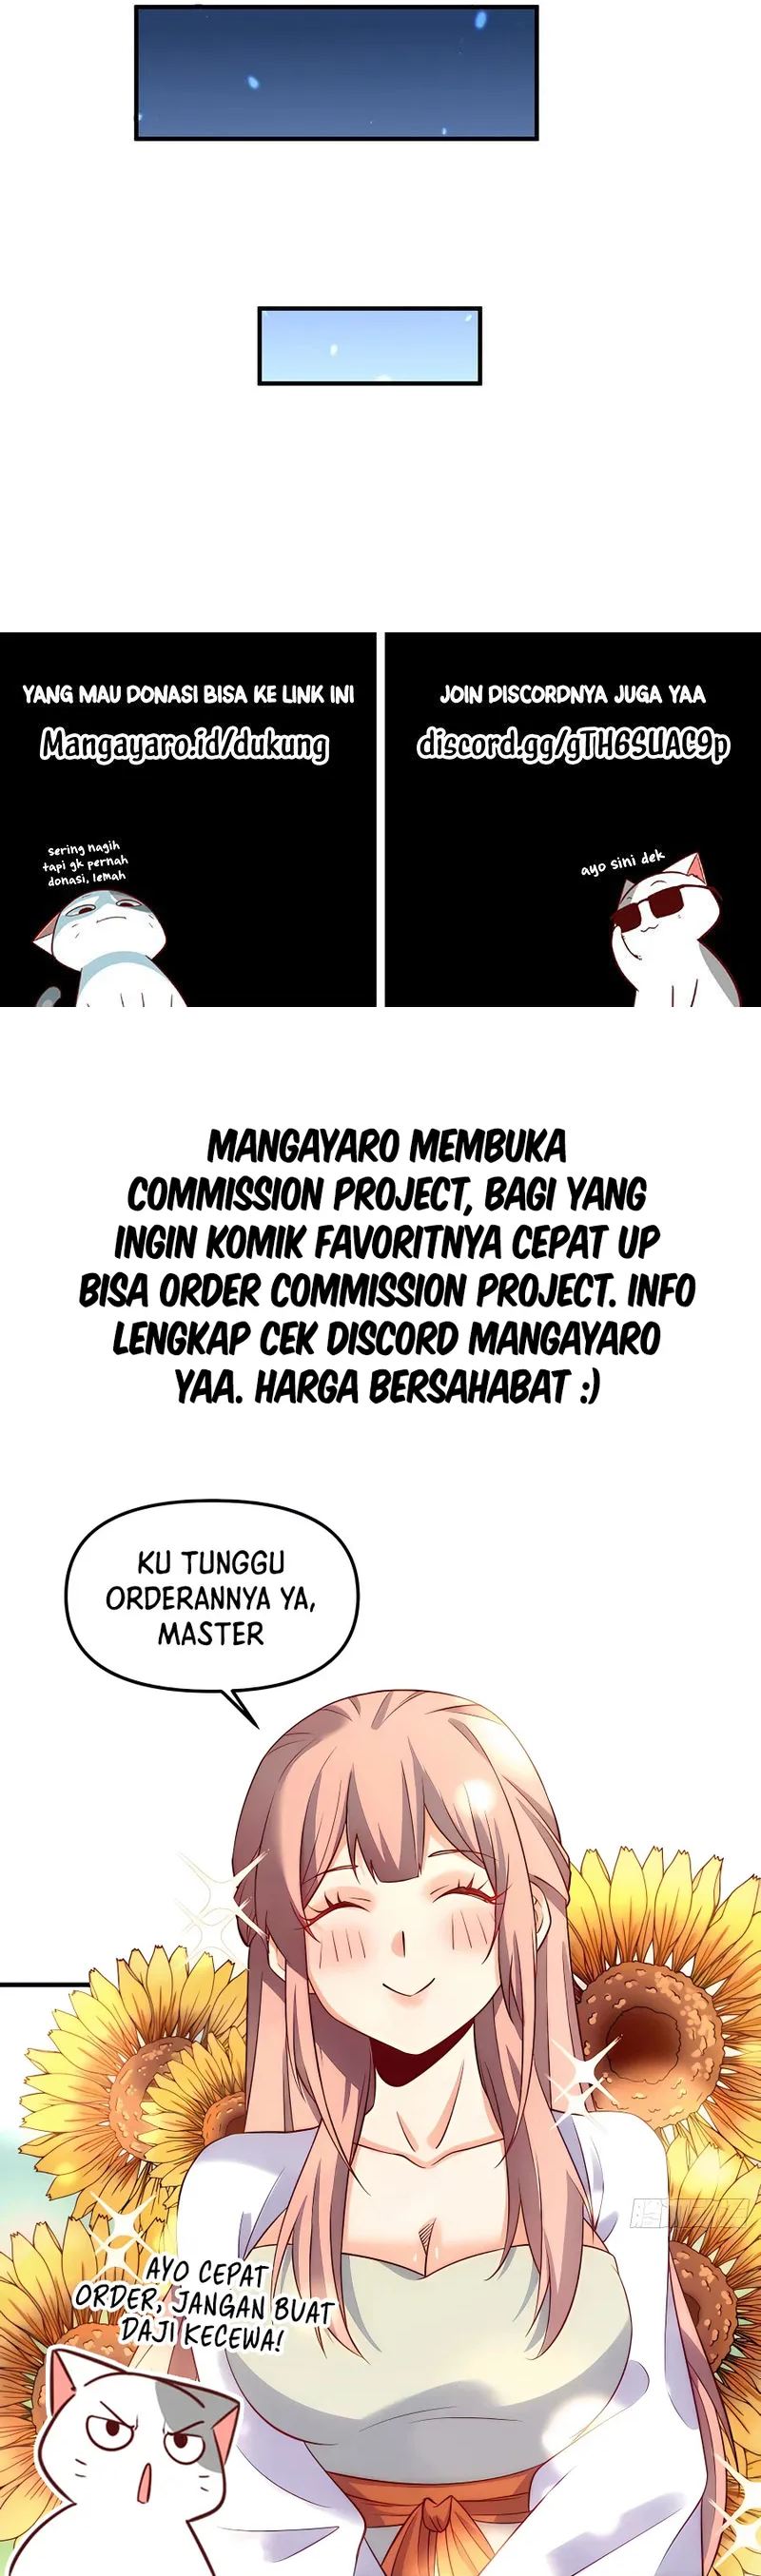 Dilarang COPAS - situs resmi www.mangacanblog.com - Komik my female apprentices are all big shots from the future 230 - chapter 230 231 Indonesia my female apprentices are all big shots from the future 230 - chapter 230 Terbaru 11|Baca Manga Komik Indonesia|Mangacan